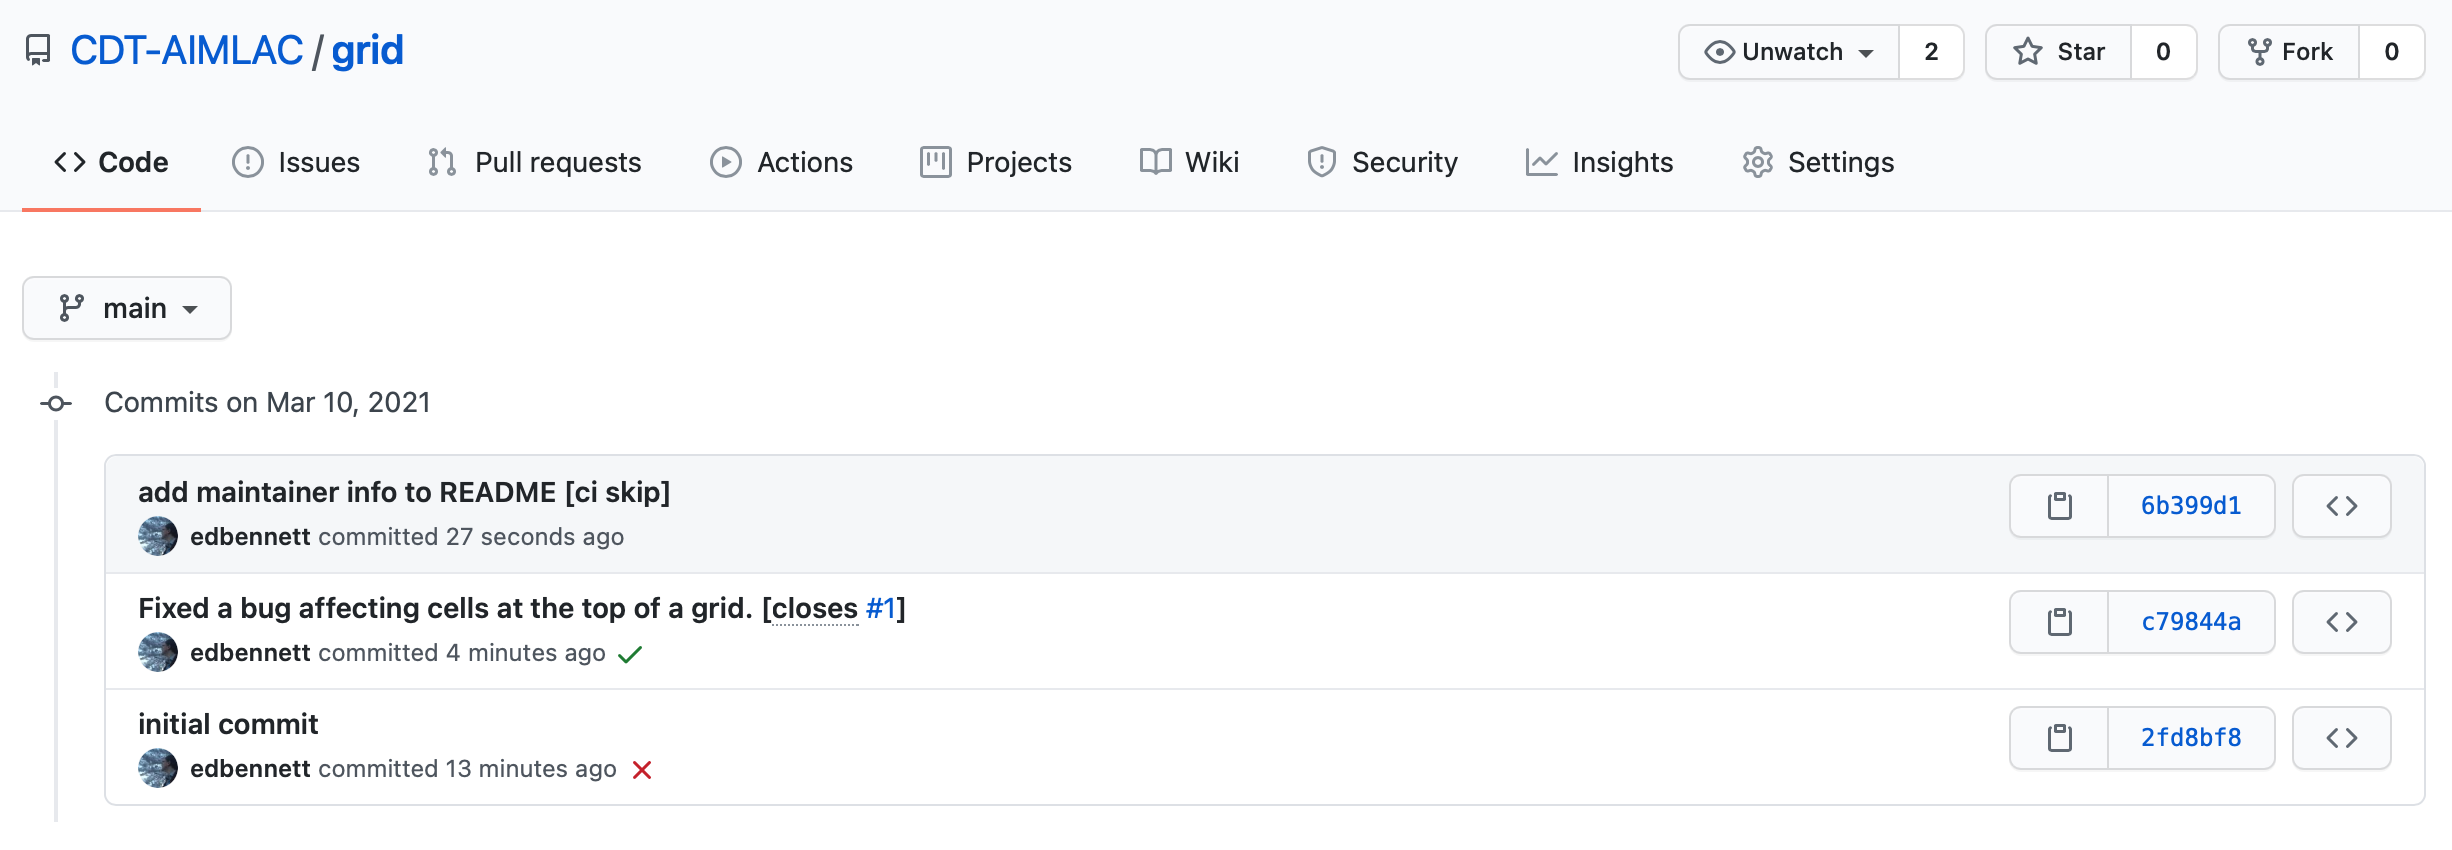 Screen shot of the commit history for the grid repository, showing the most recent commit does not have a GitHub Actions workflow run associated with it.